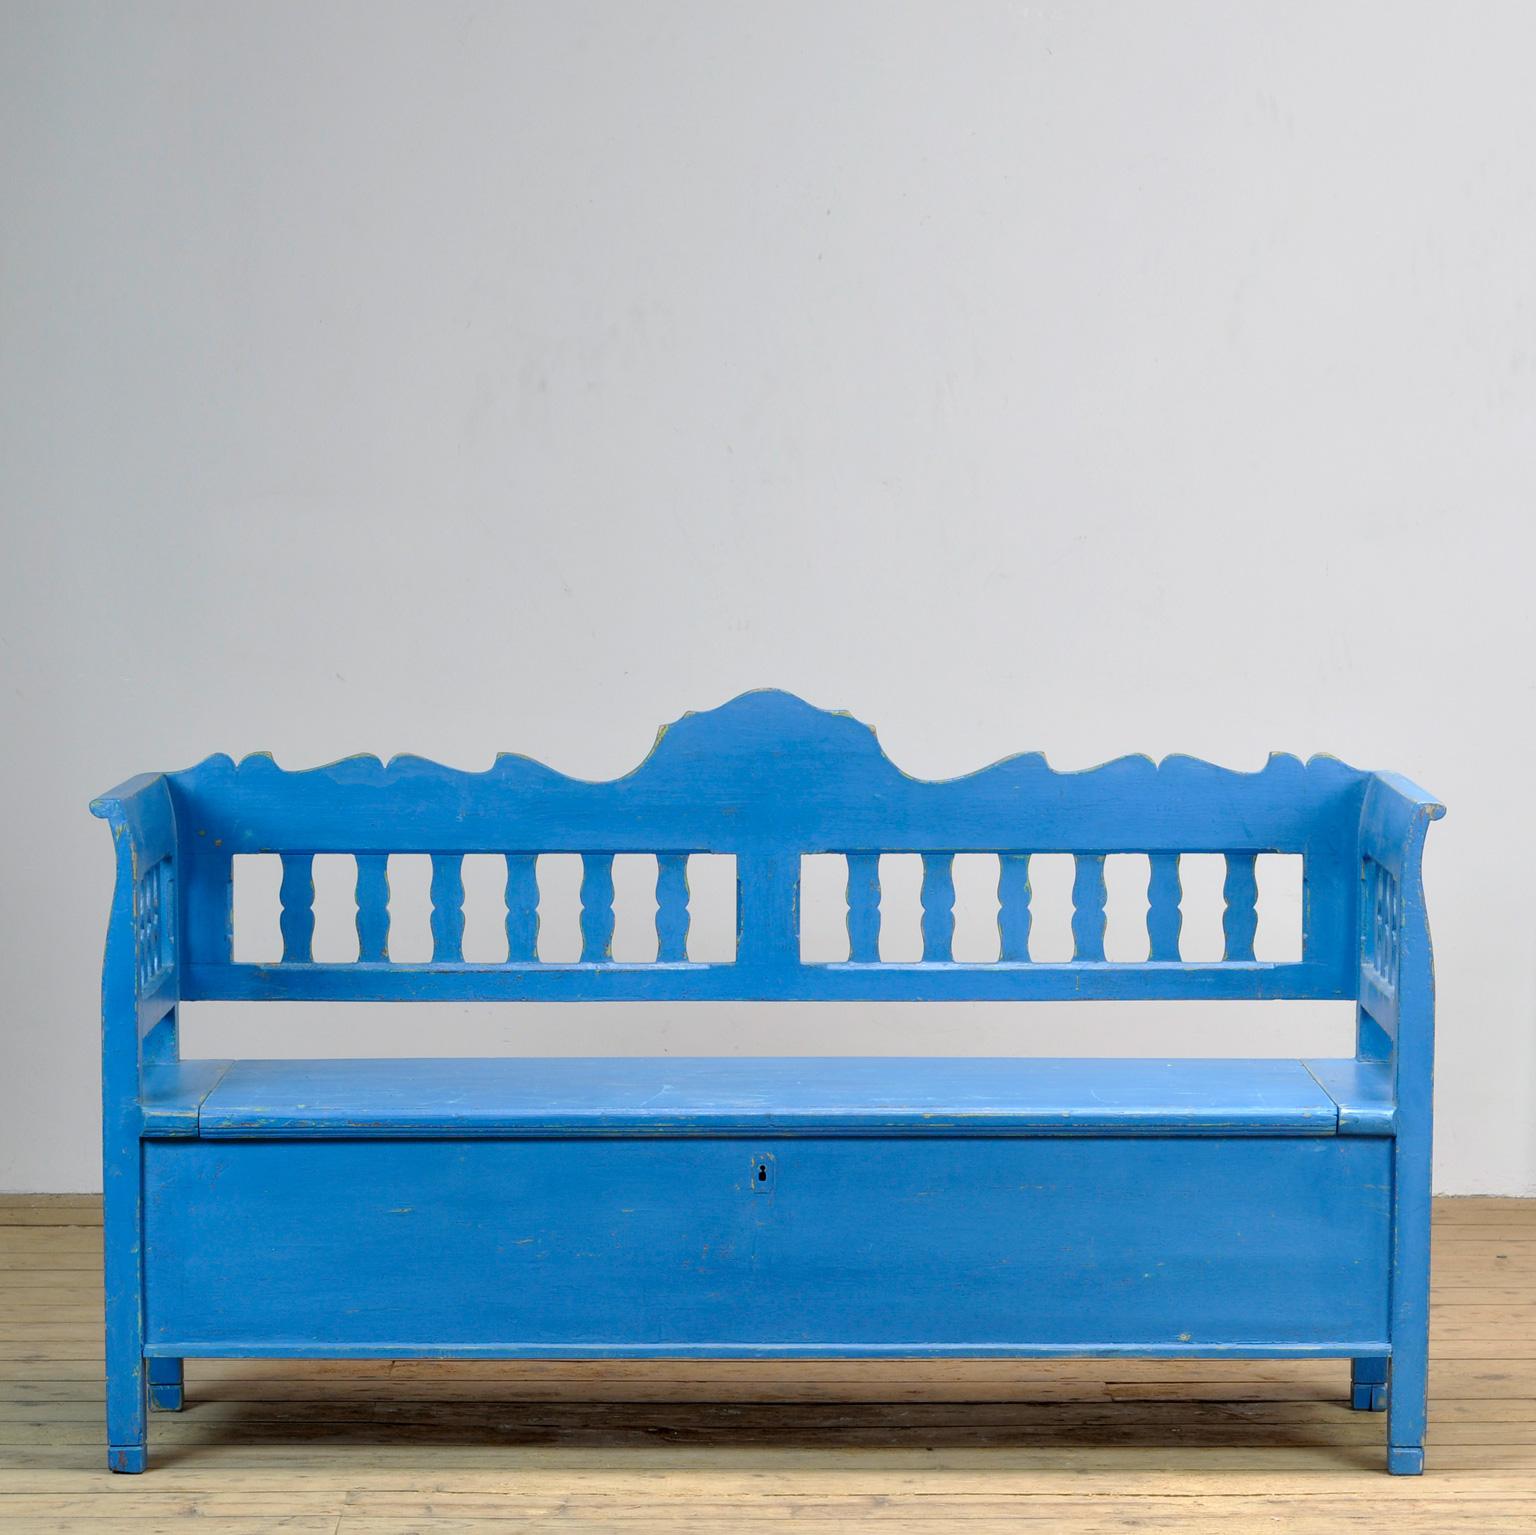 A charming bench from Hungary. Over time and use, the blue paint has been worn away in places to the wood. With storage space under the seat. The bench is stable and sturdy. Free of woodworm.